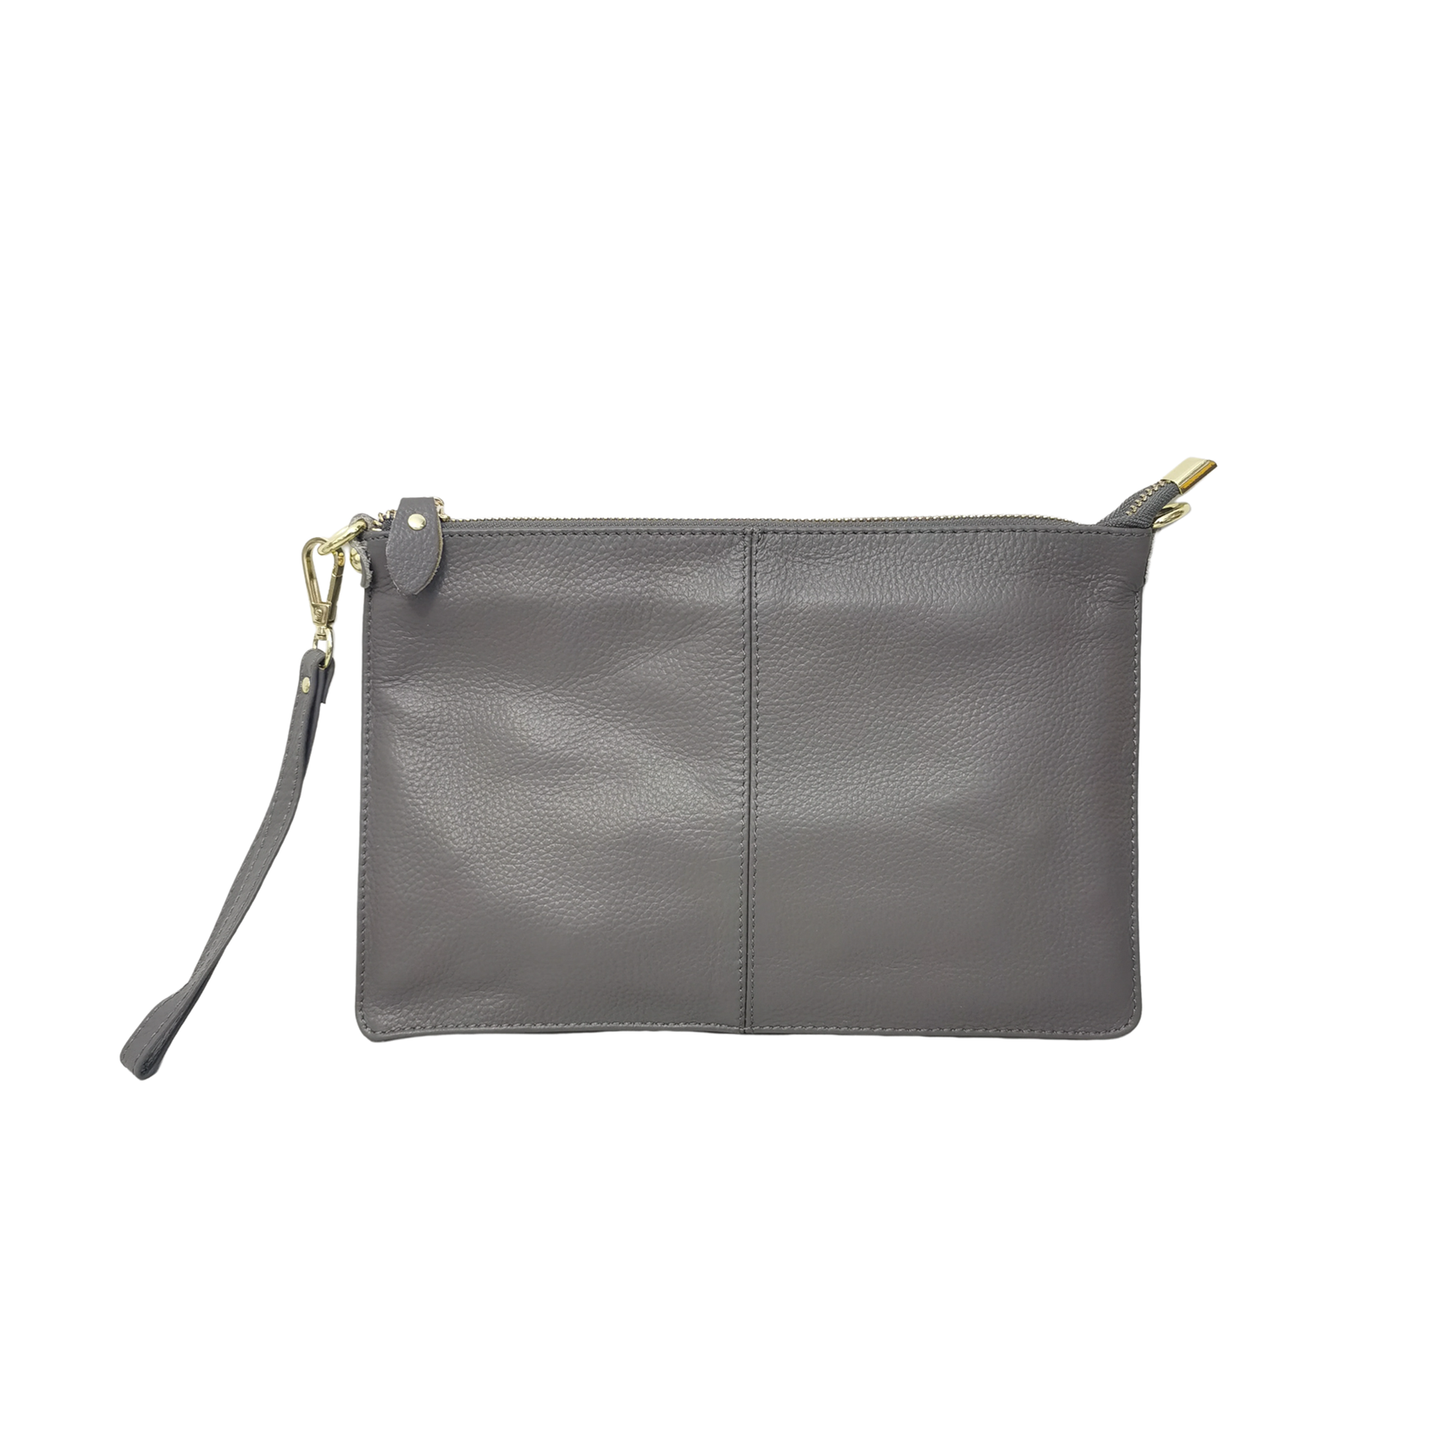 Unisex genuine cowhide leather hand clutch with sling